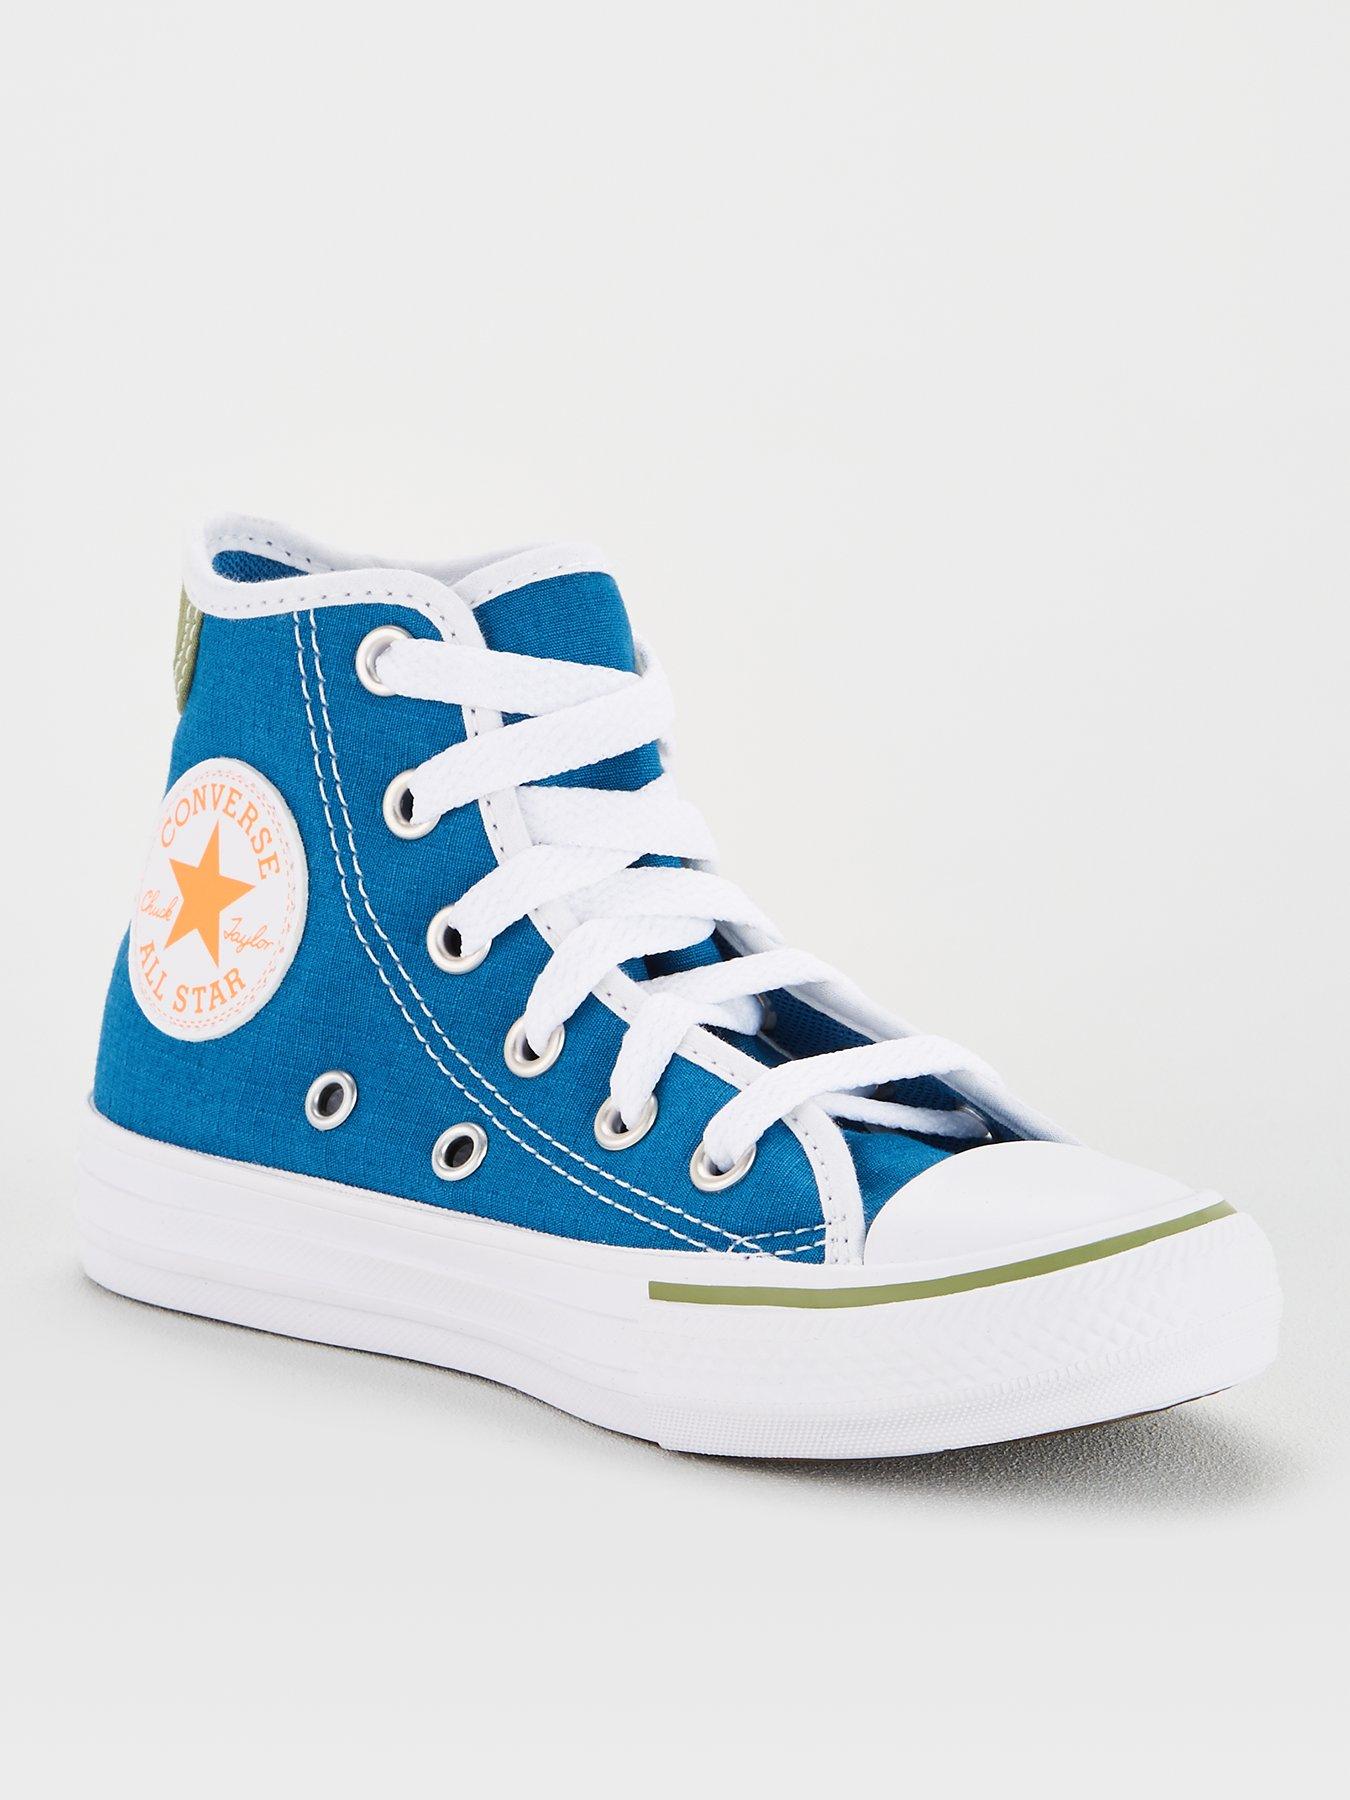 converse trainers uk